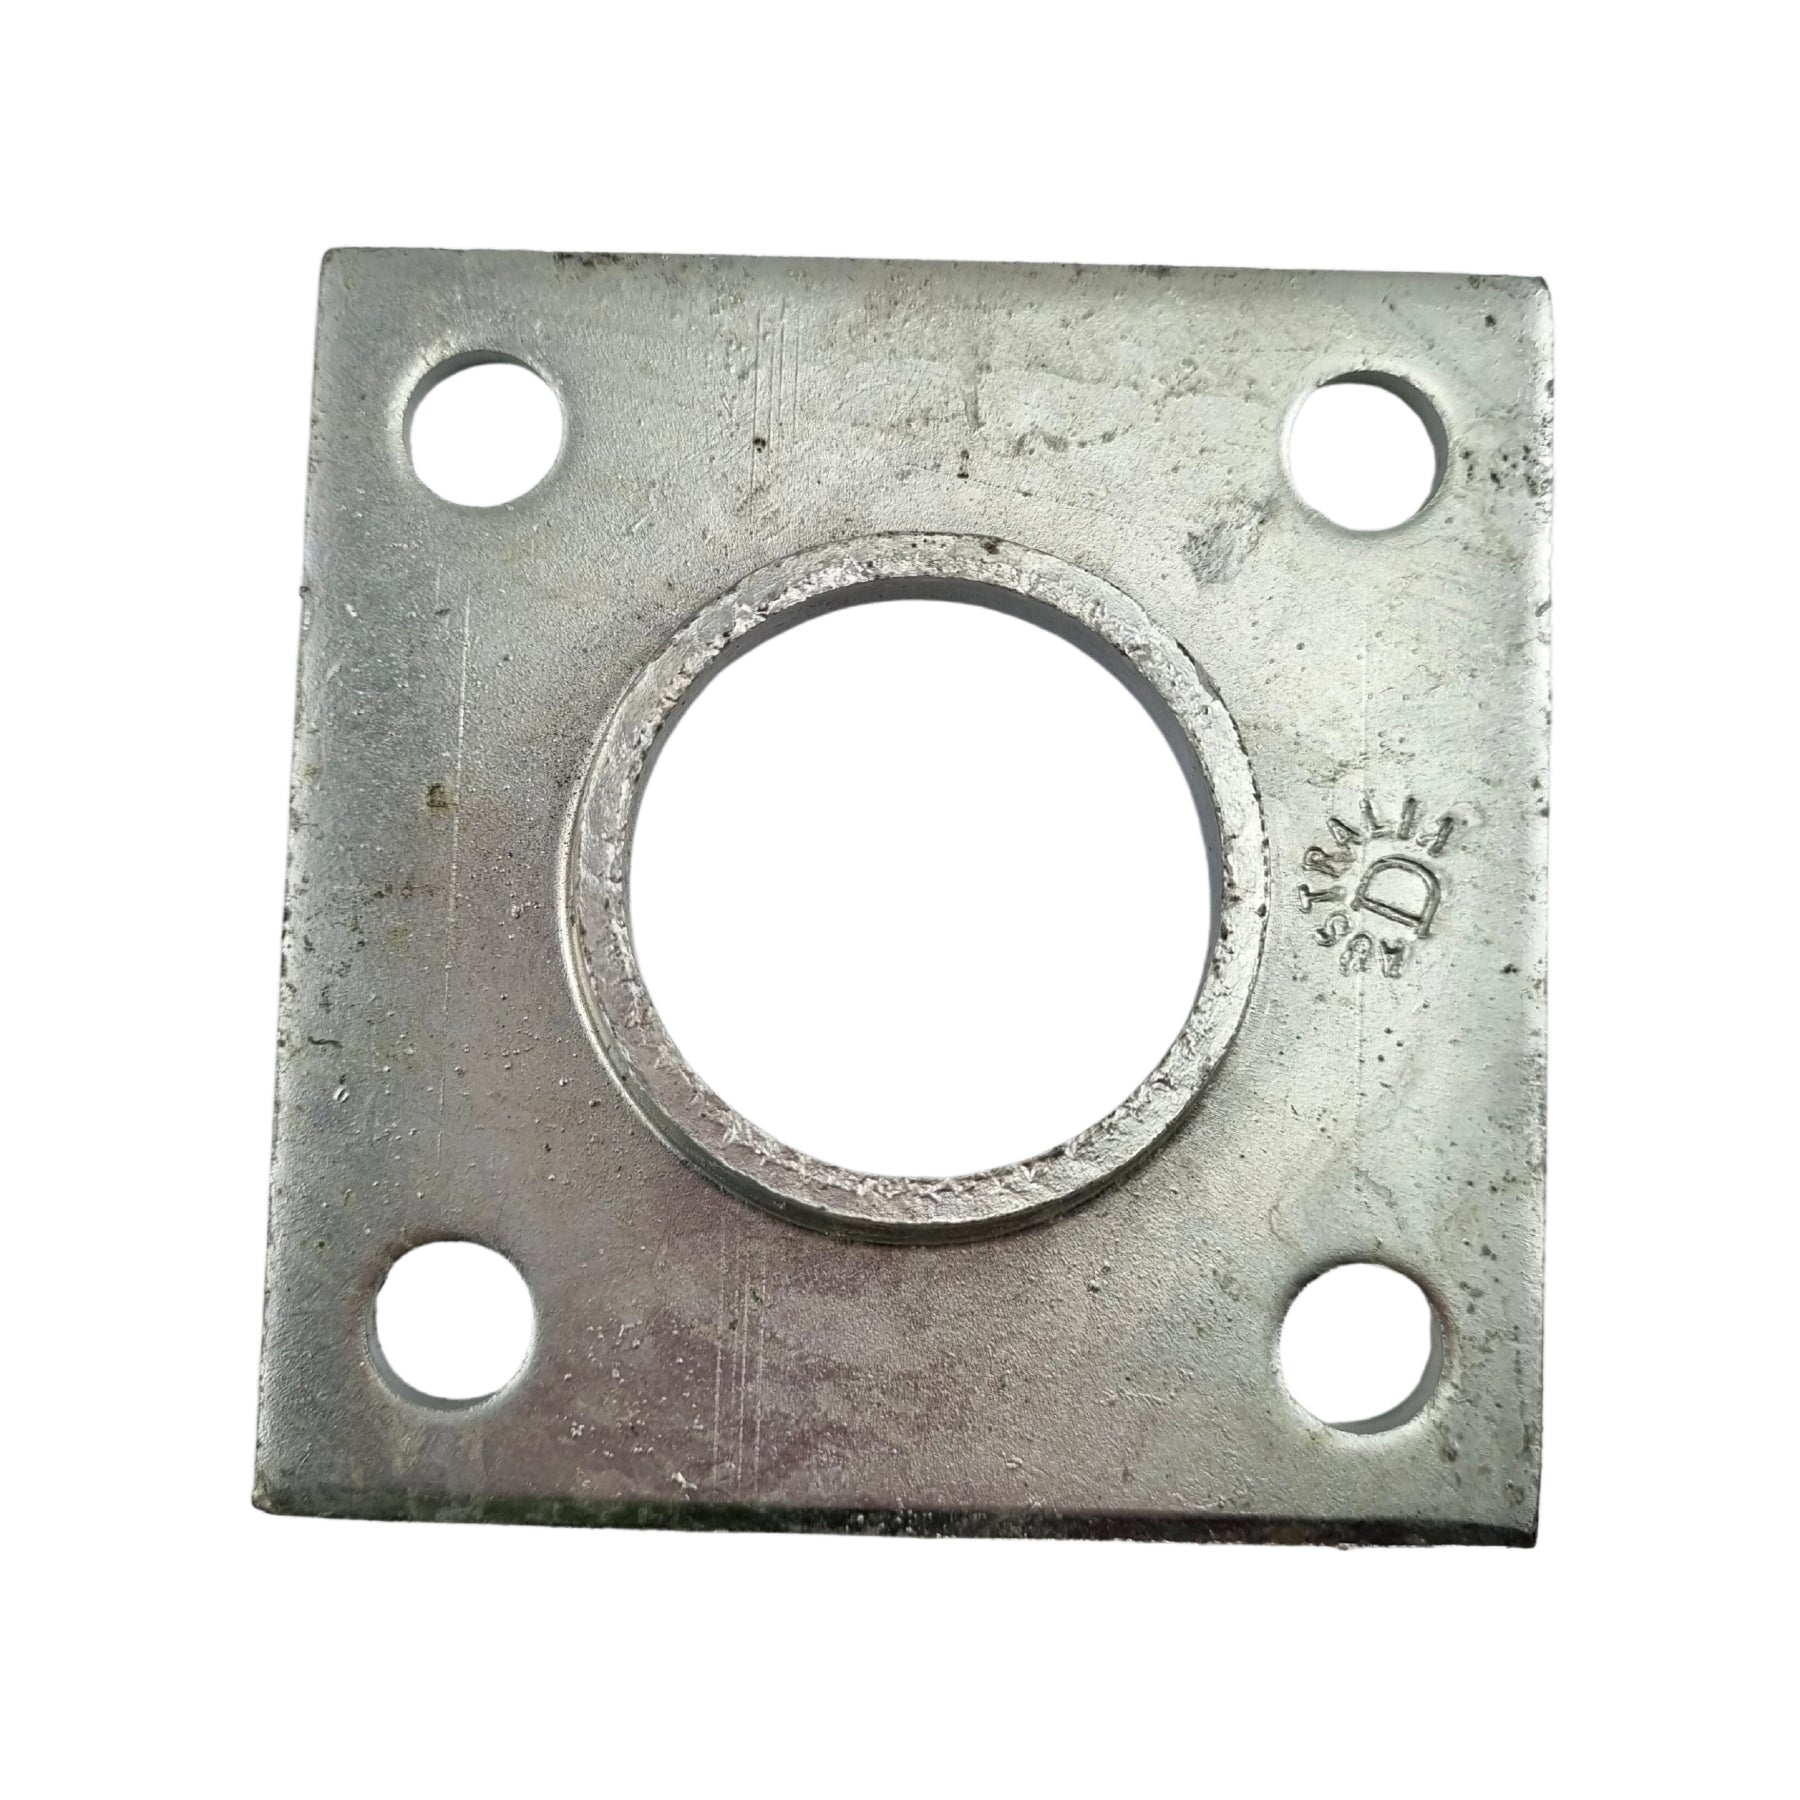 Shop flanges in the fence and gate fittings range online now. Australia wide shipping